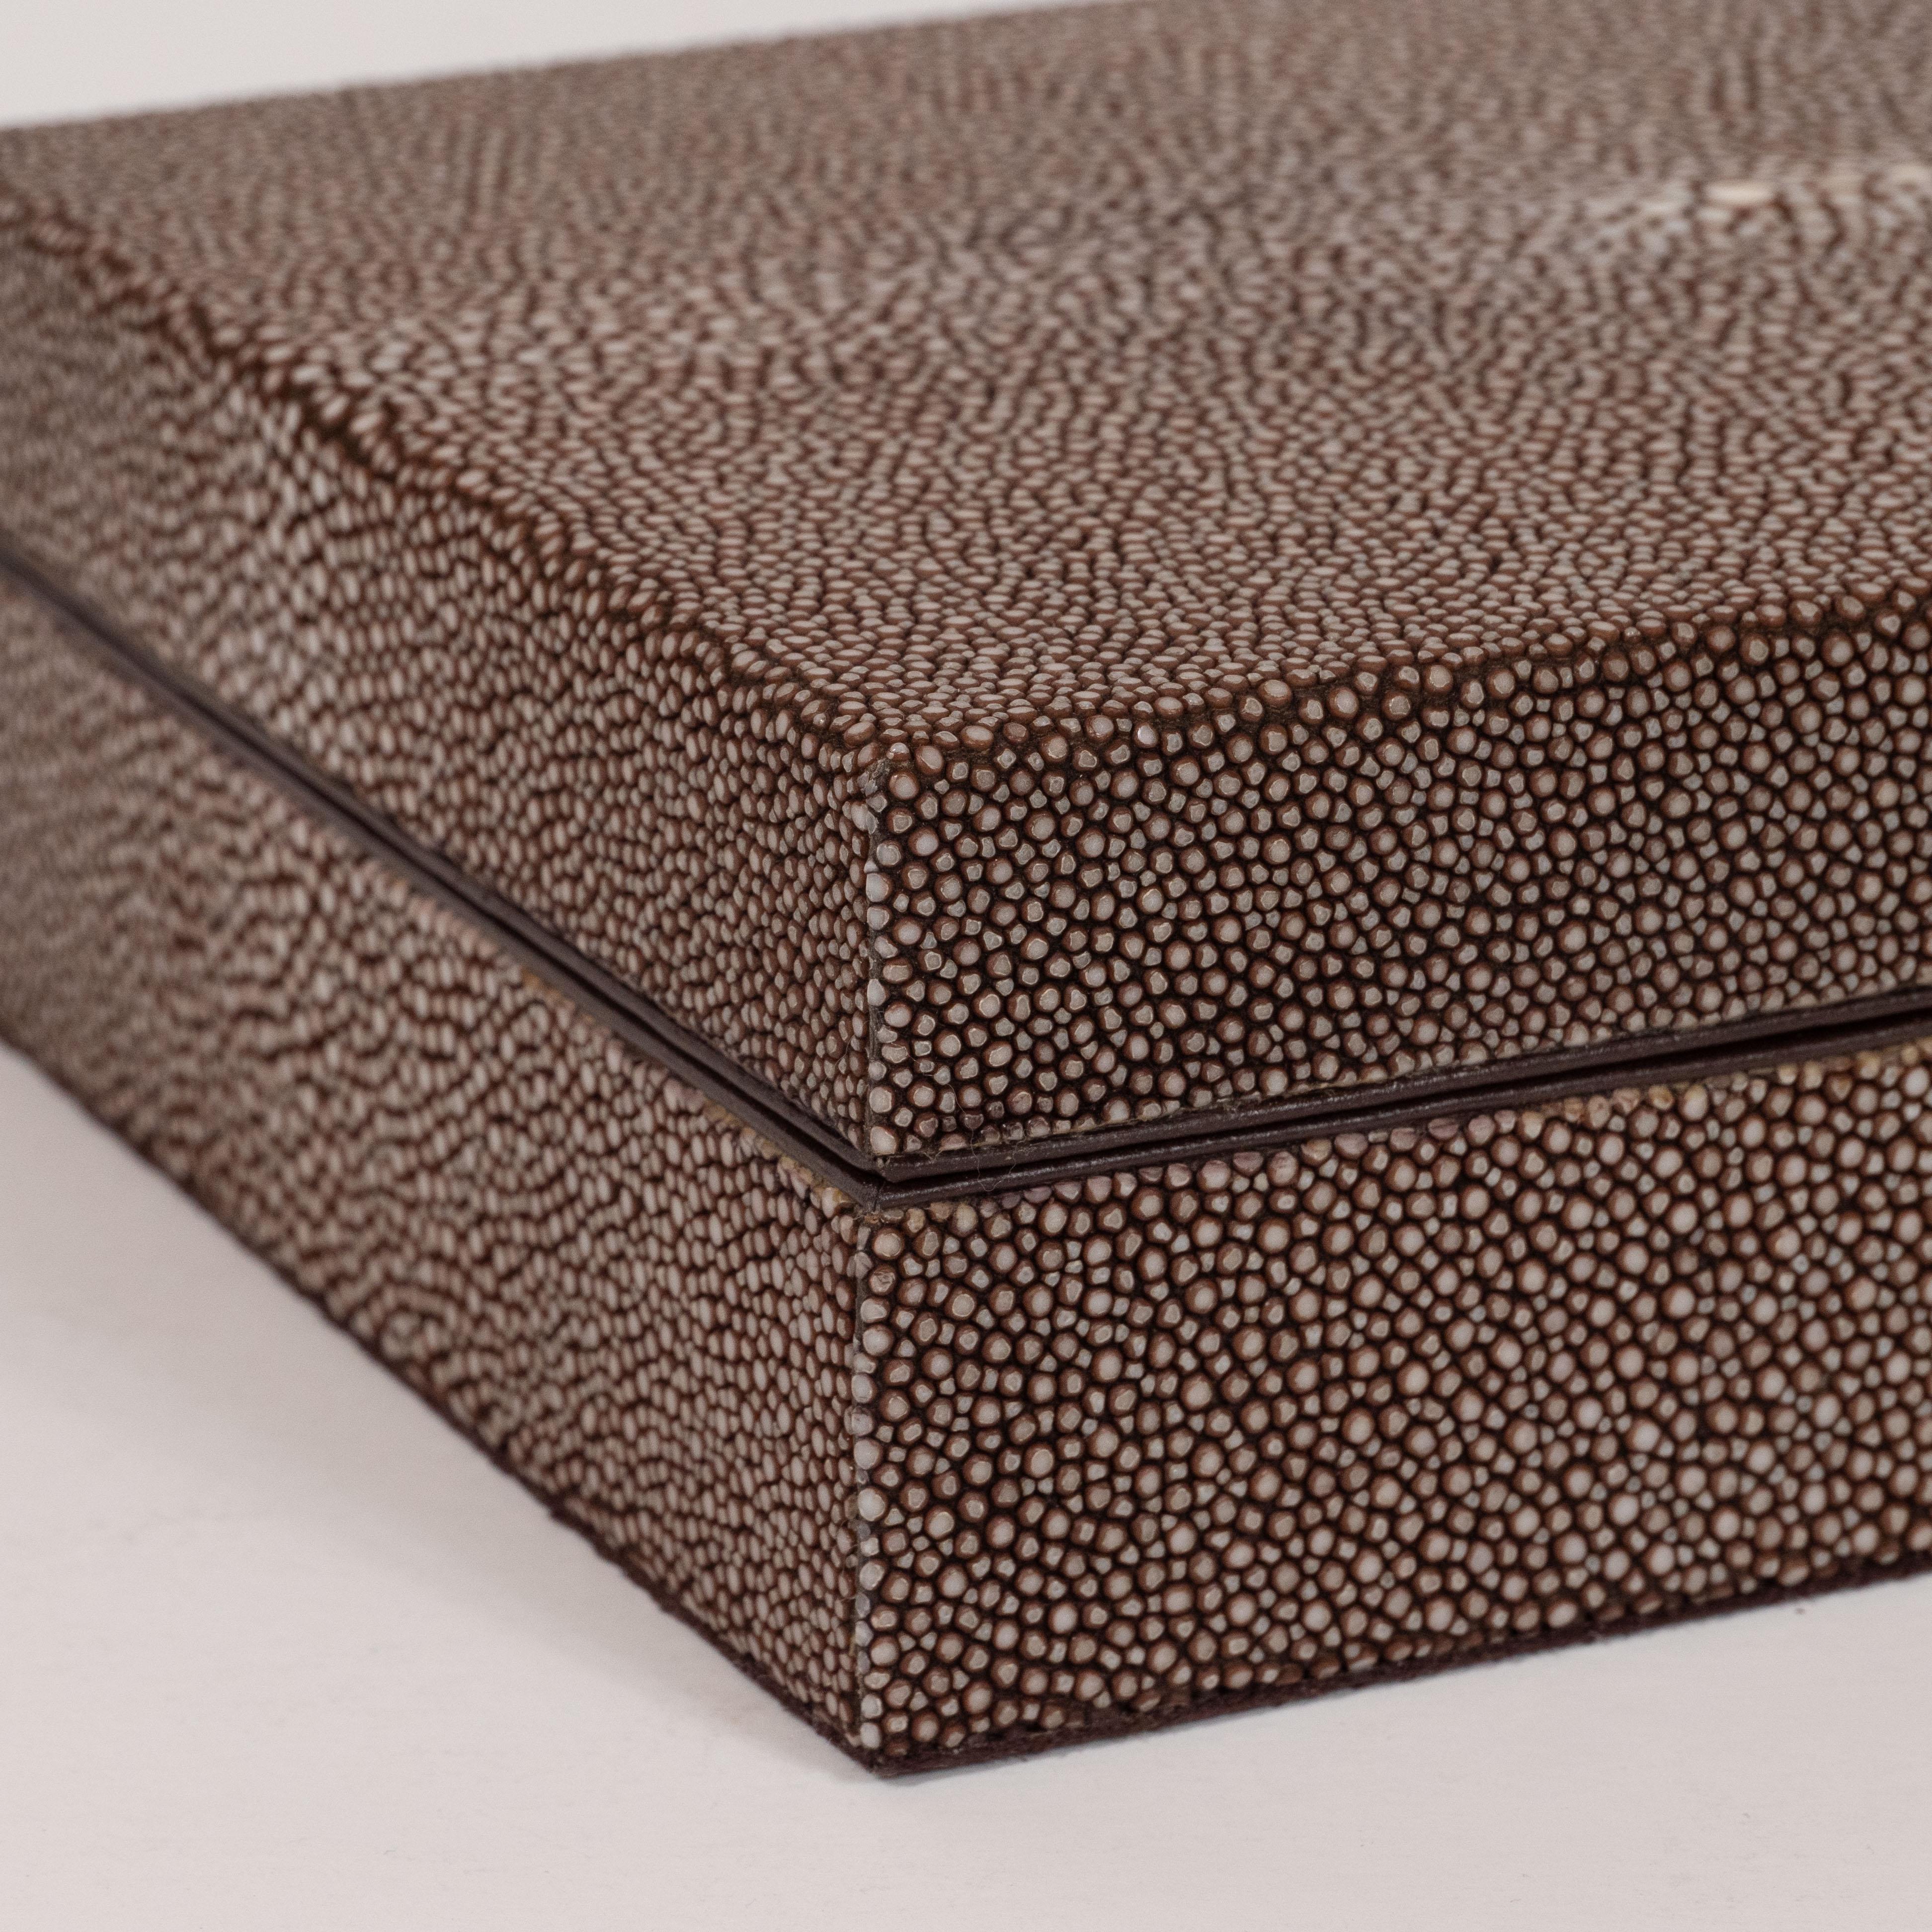 This stunning Mid-Century Modern decorative lidded box offers a volumetric rectangular box covered in java and cream hued shagreen- showcasing the inherent natural grain of the material. The interior of the box is lined in coffee hued suede. While